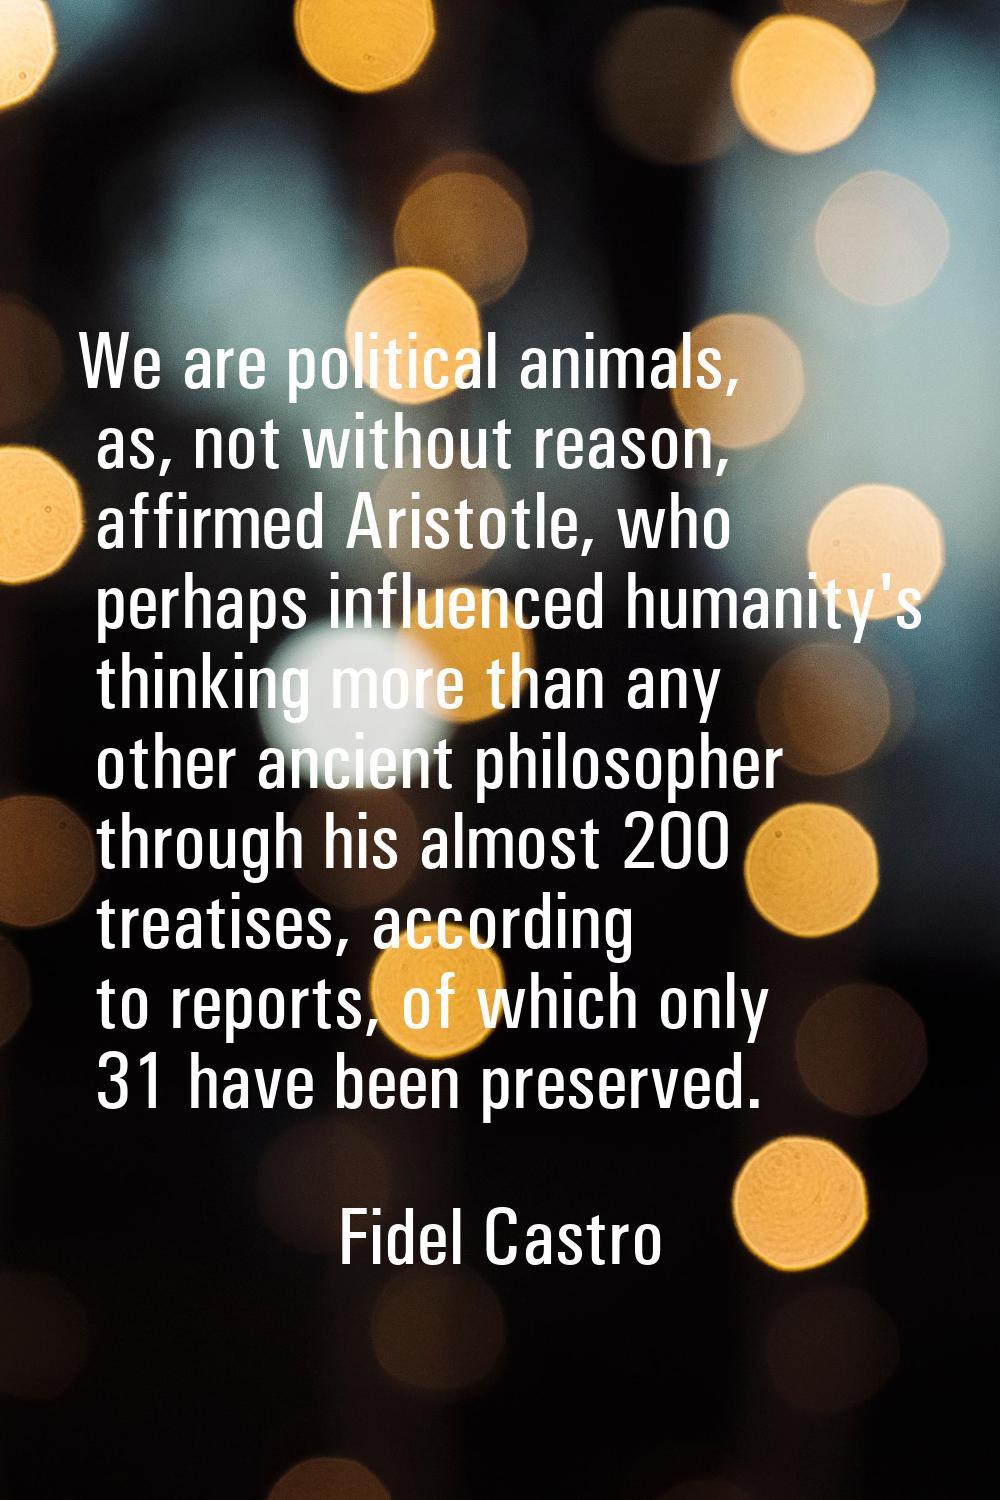 We are political animals, as, not without reason, affirmed Aristotle, who perhaps influenced humani